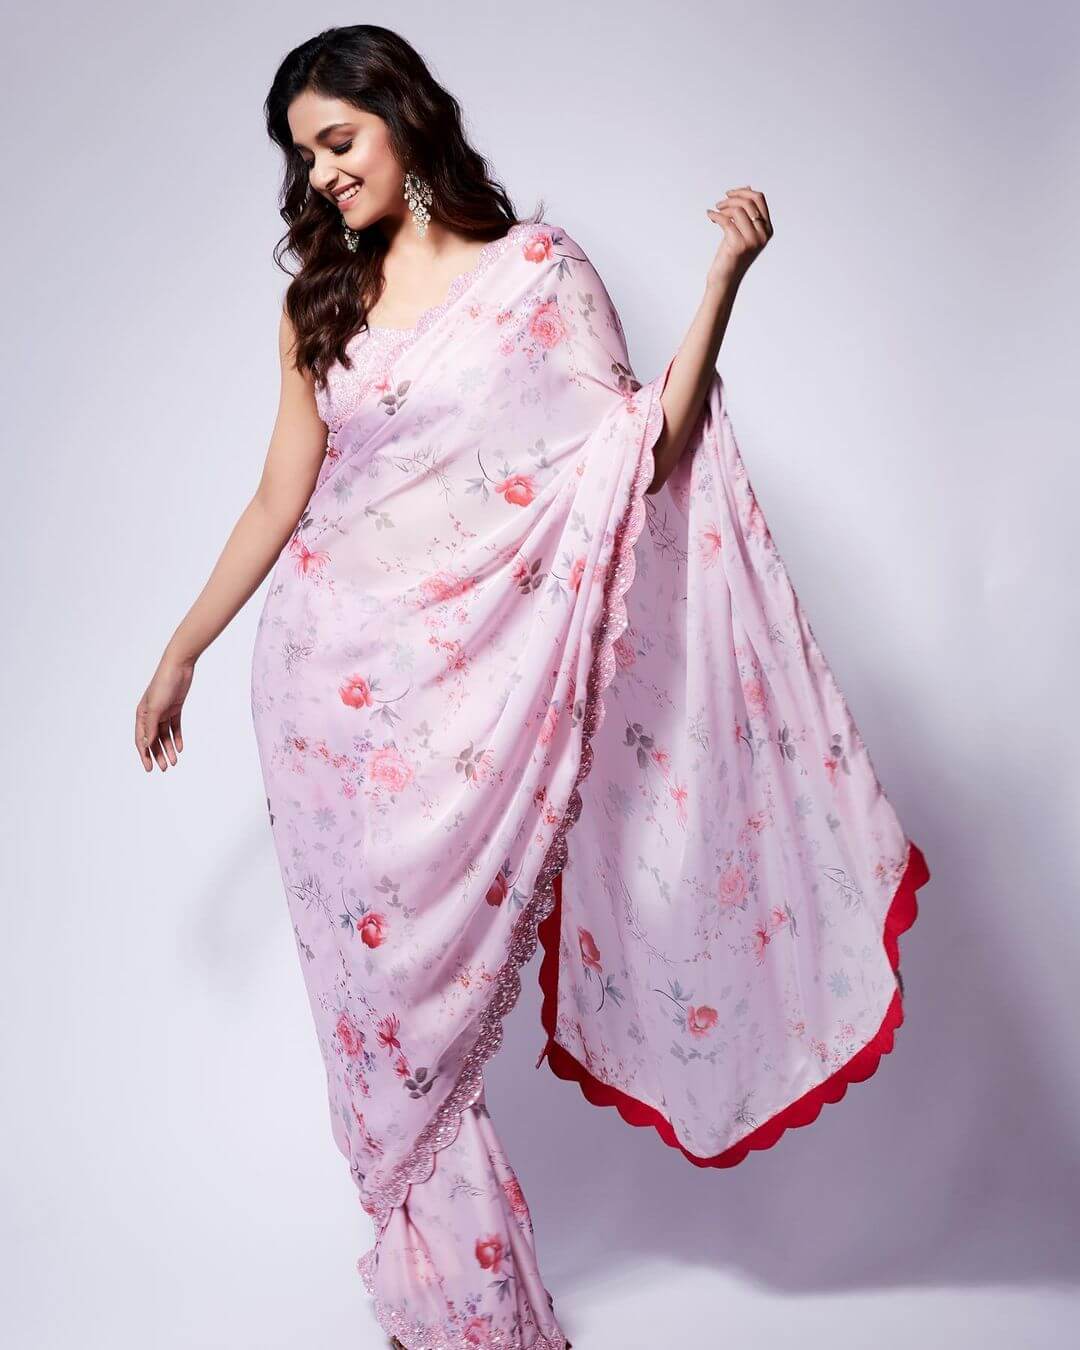 Keerthy Suresh Shines in a Pink Saree